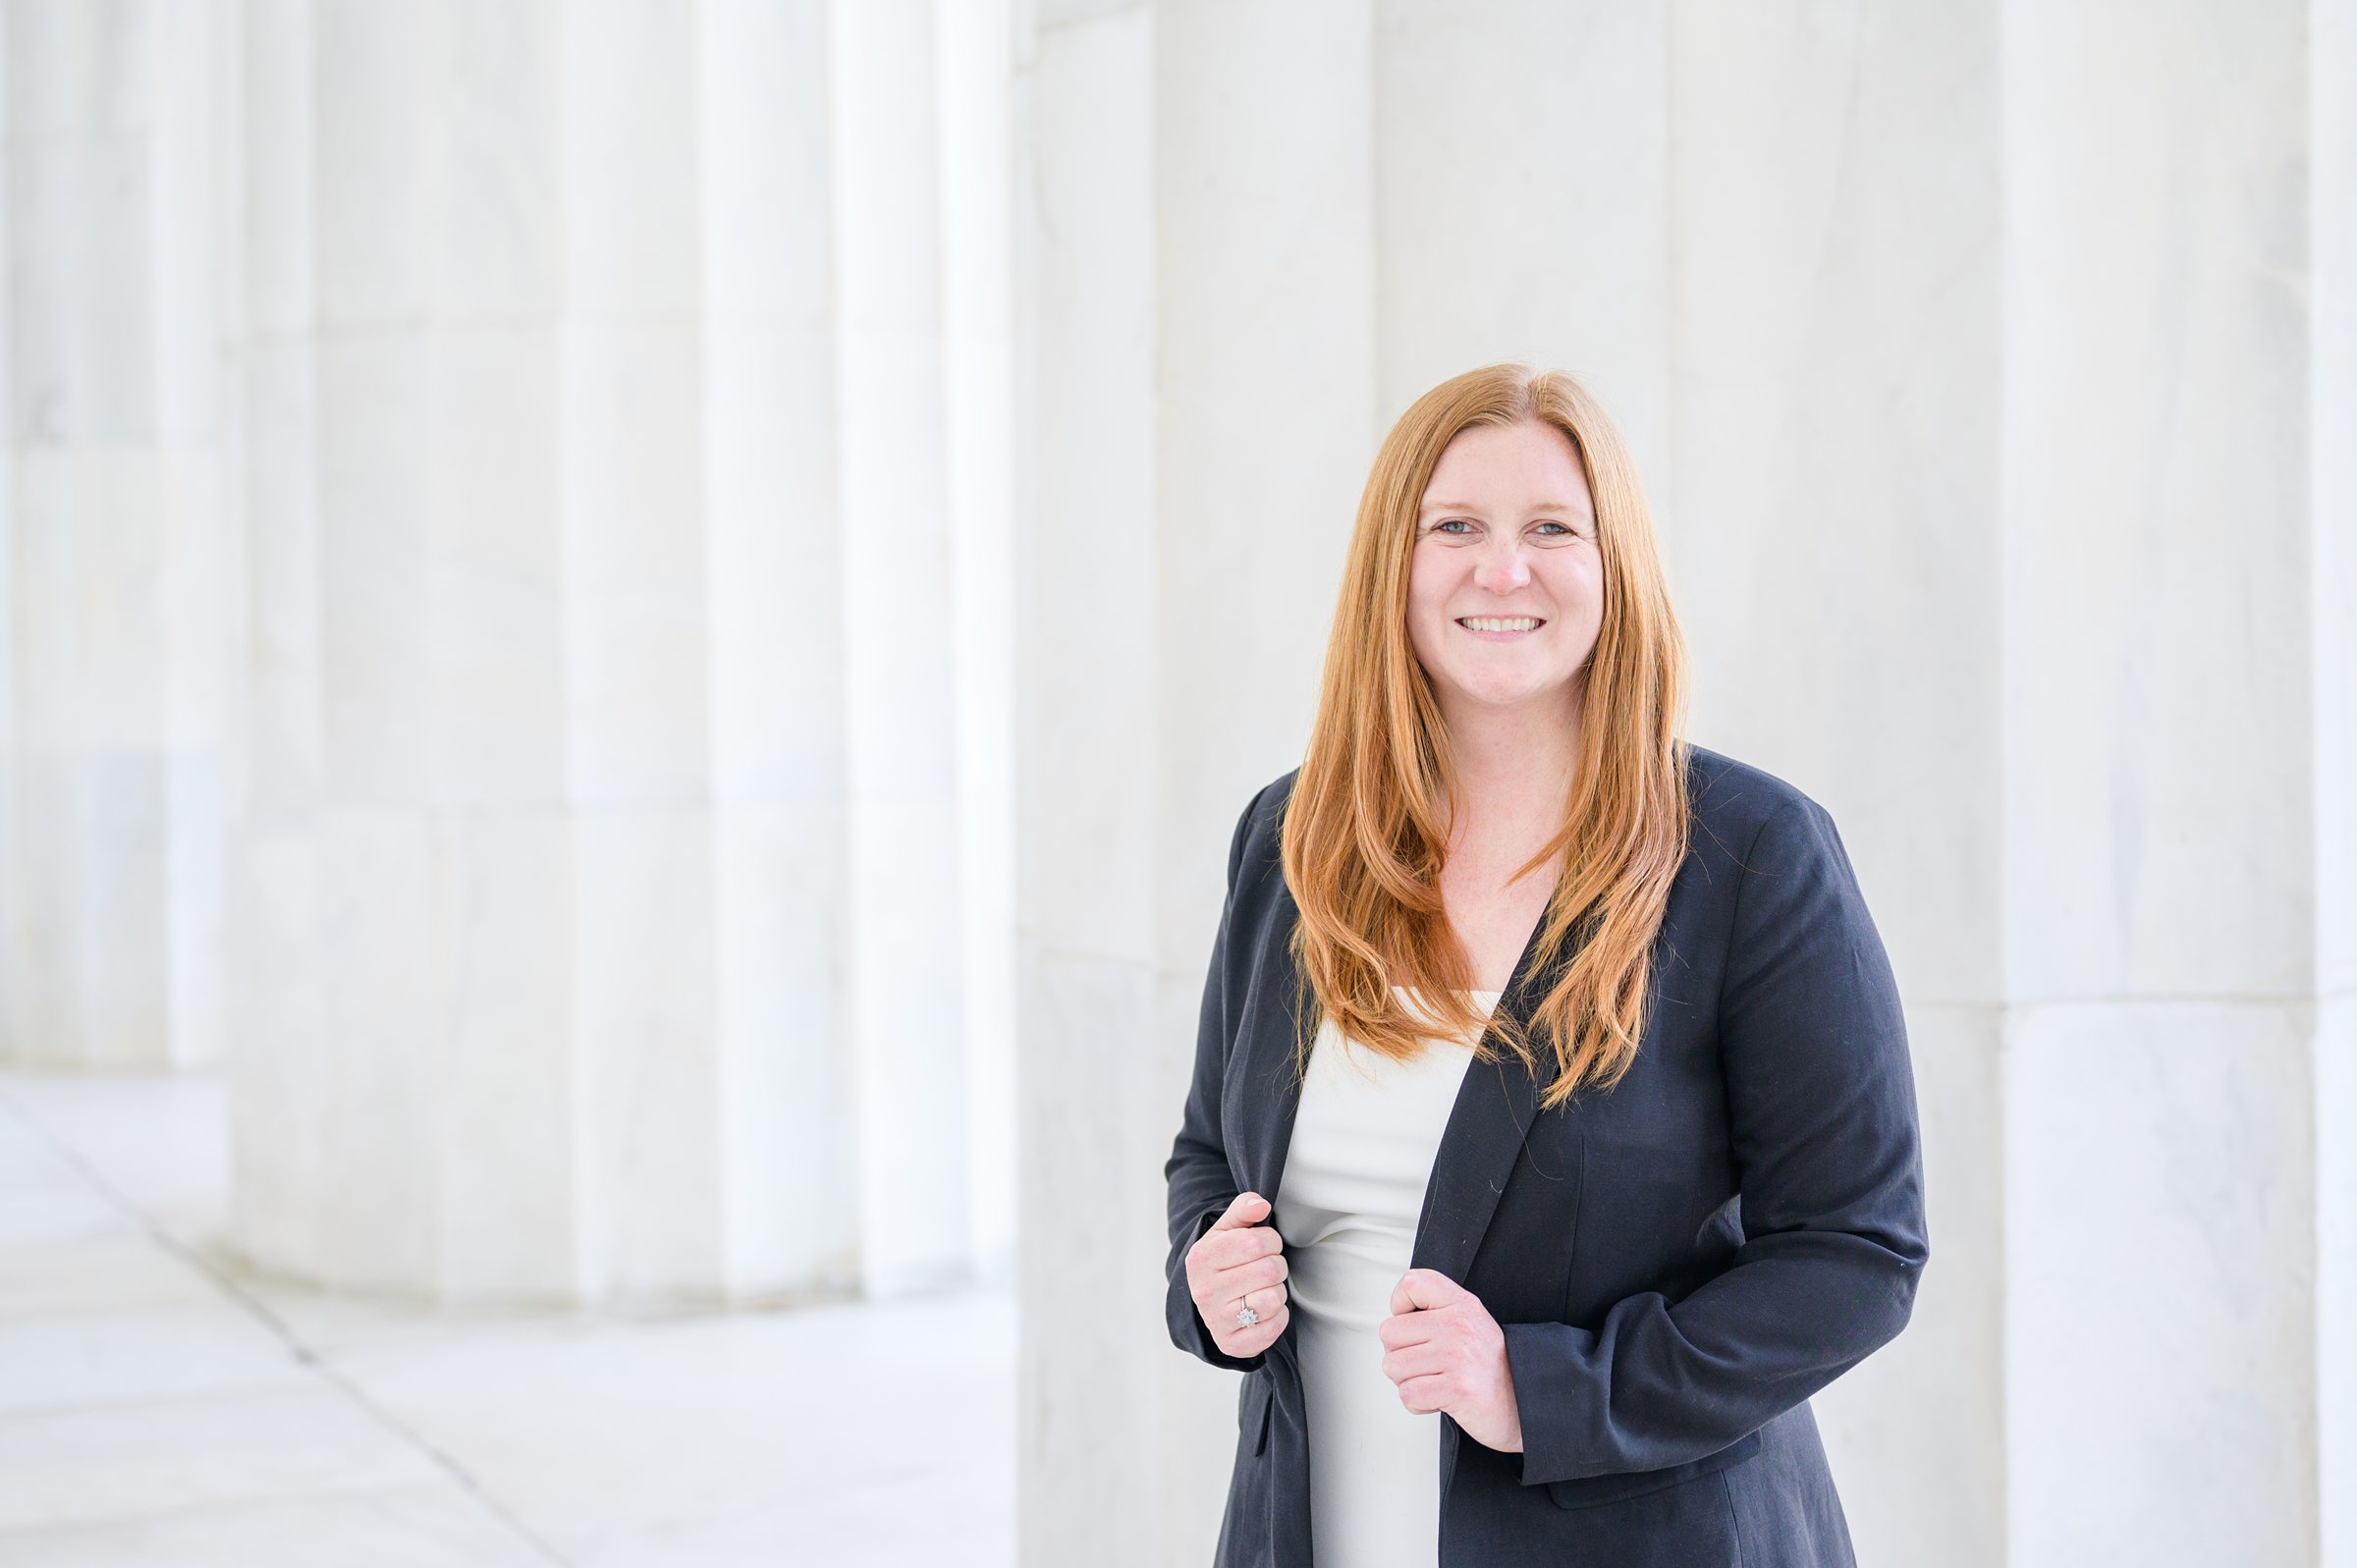 Brittany's Law School Grad Portraits on the National Mall in Washington DC photographed by Baltimore Photographer Cait Kramer